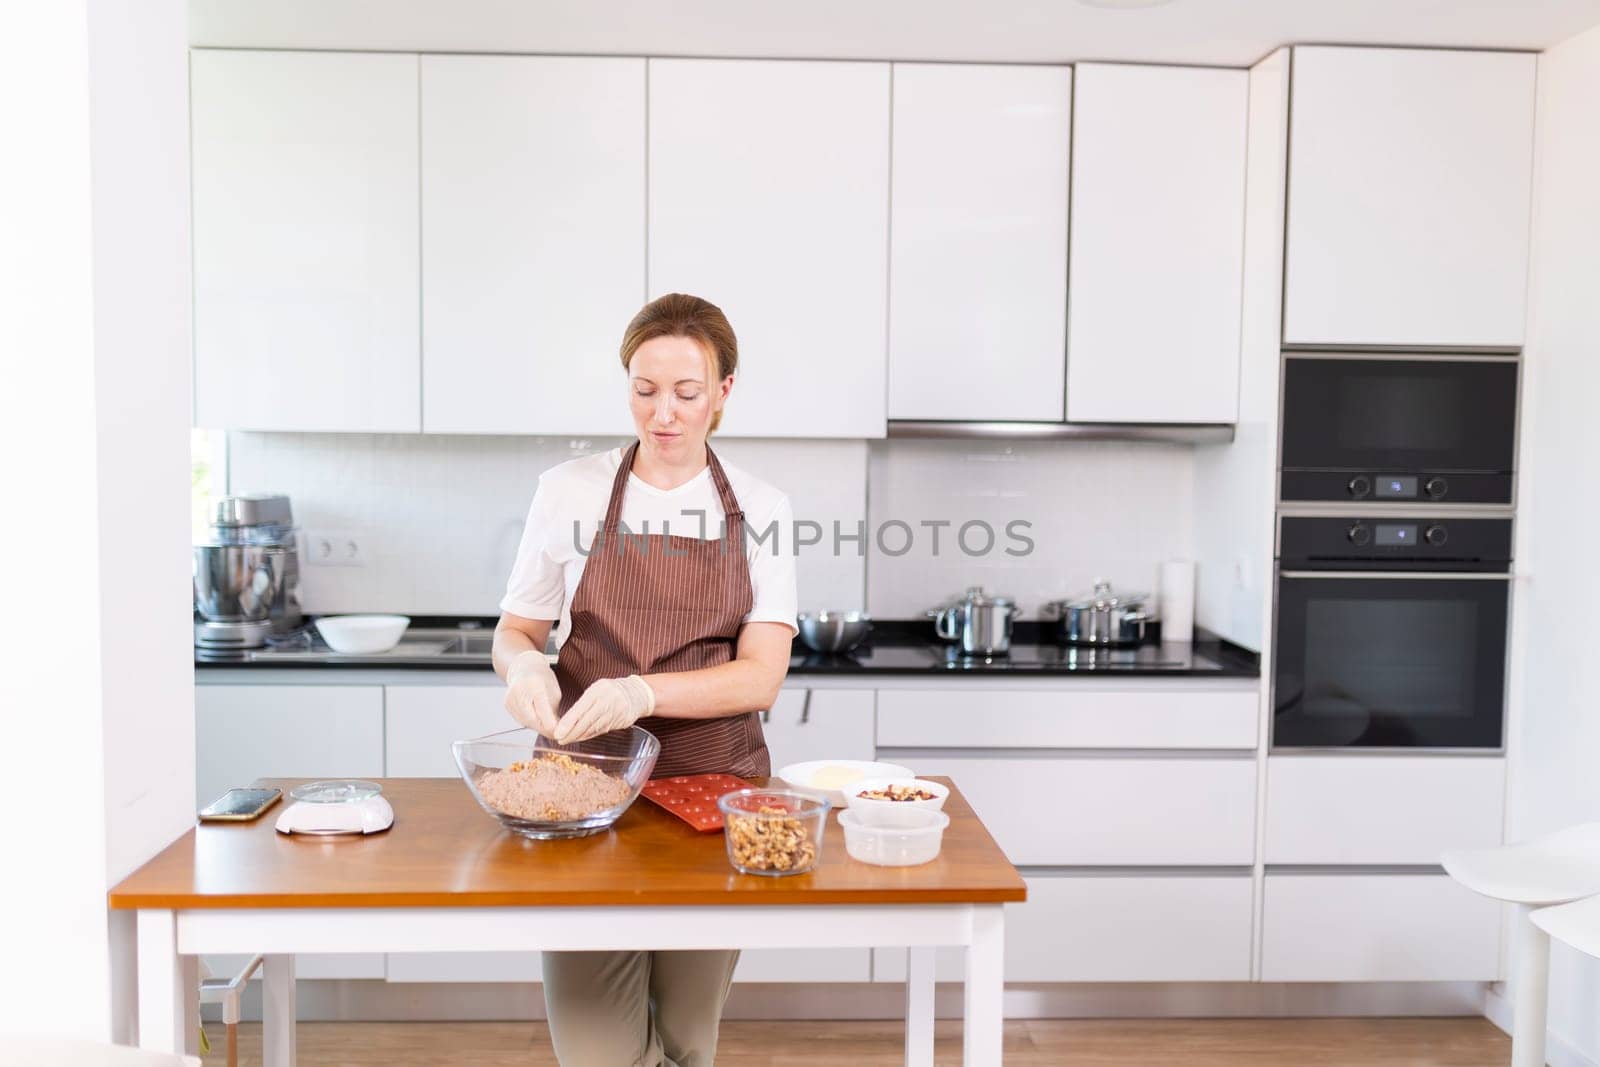 A woman is standing in a kitchen, preparing food. She is wearing an apron and has a bowl of food in front of her. The kitchen is clean and well-organized, with various appliances such as an oven